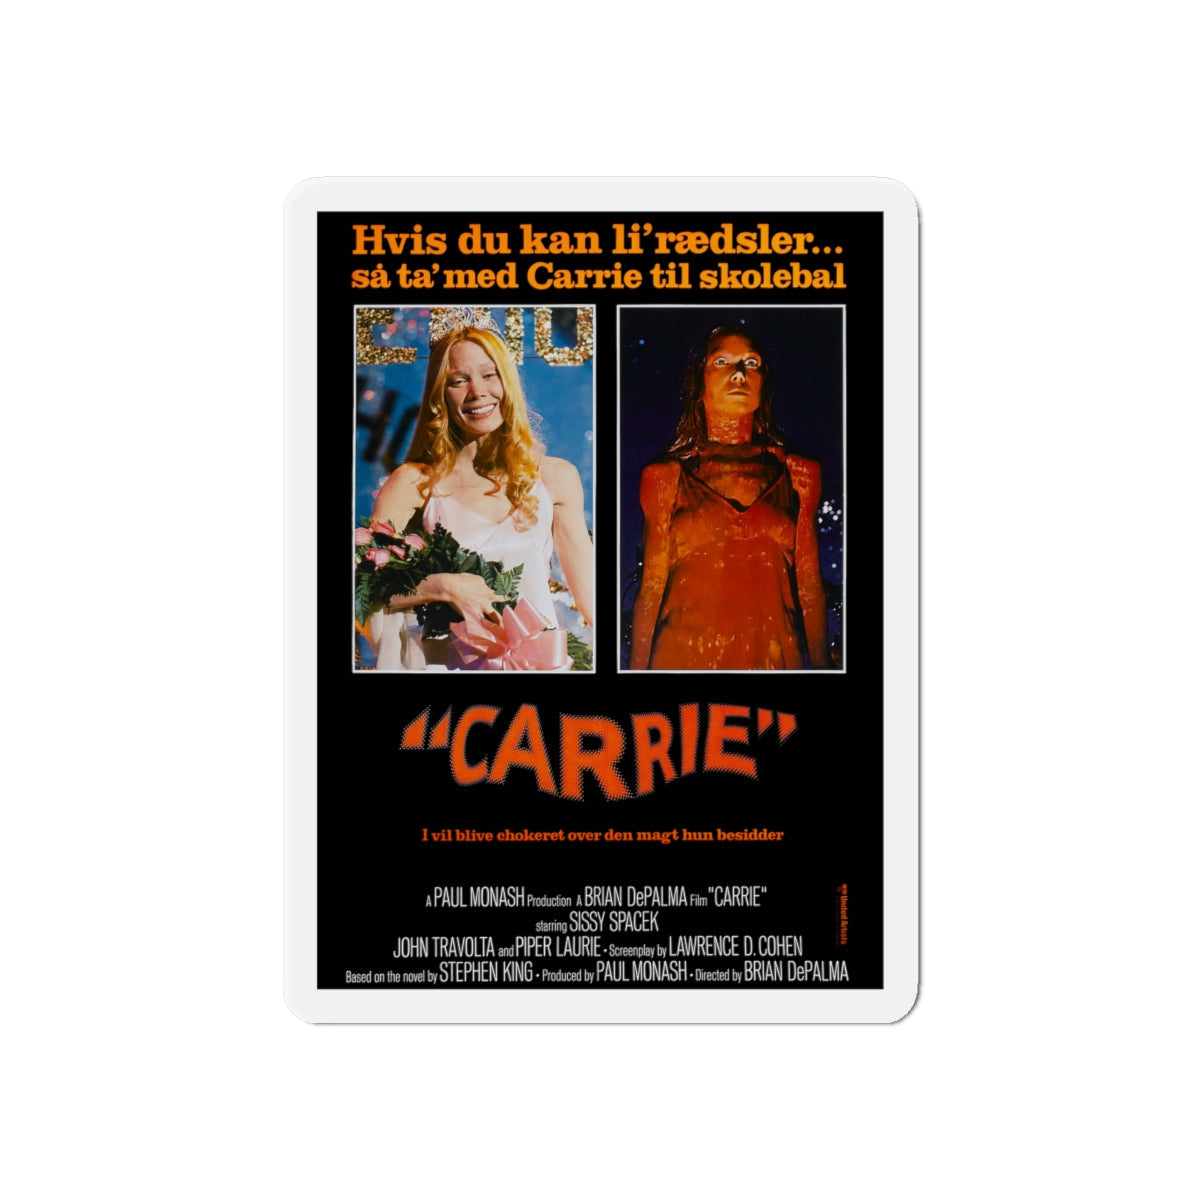 CARRIE (DANISH) 1976 Movie Poster - Die-Cut Magnet-6 × 6"-The Sticker Space